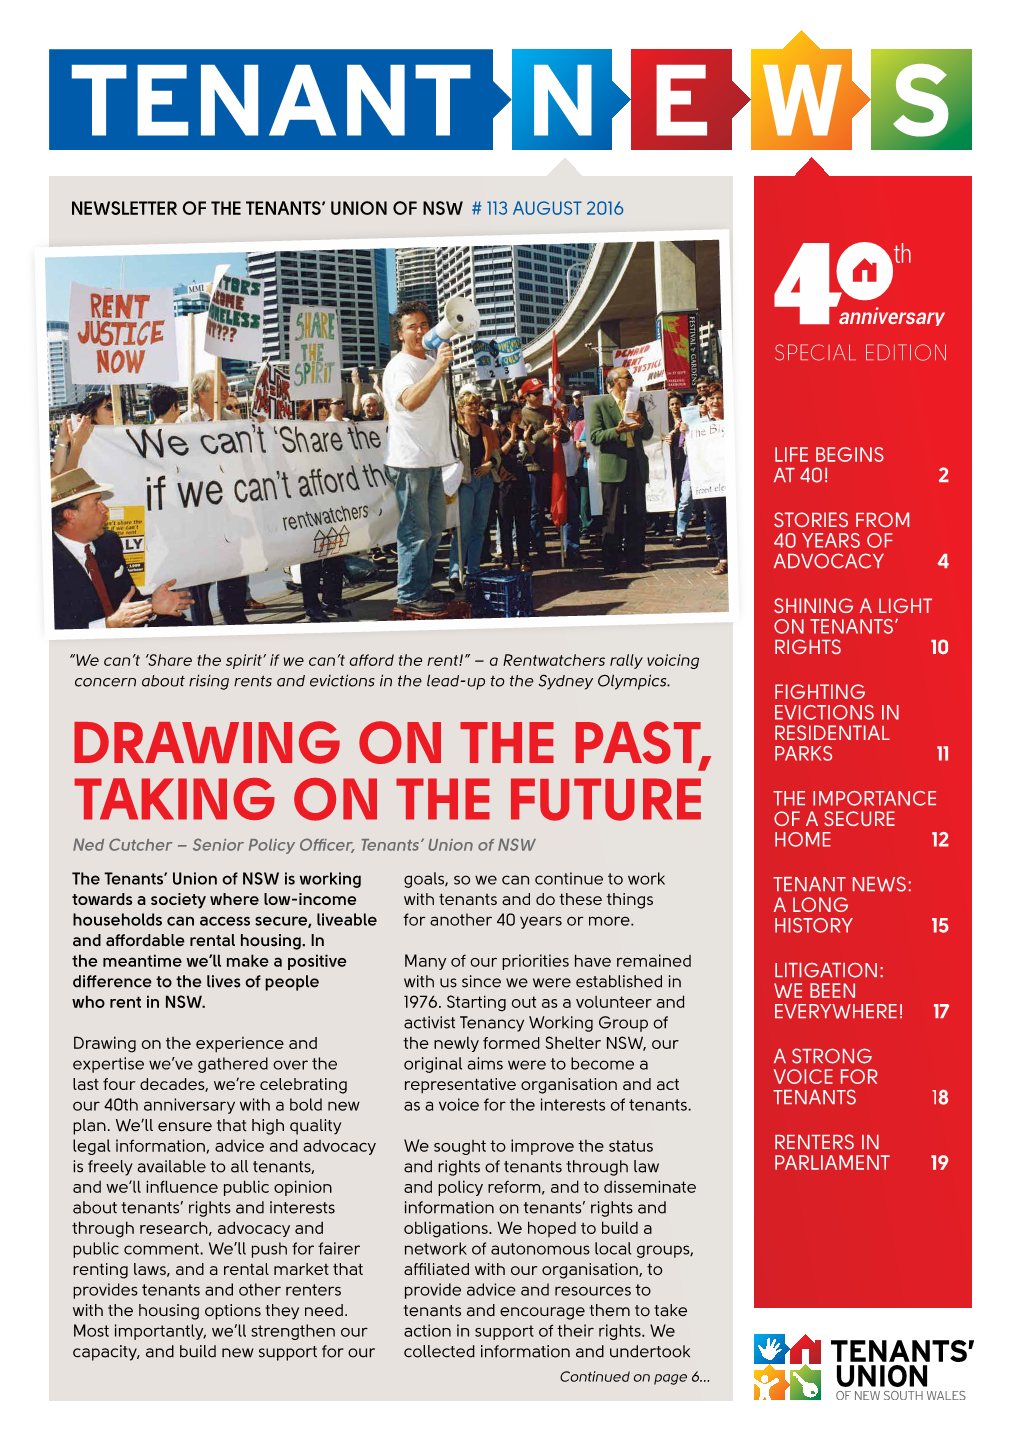 DRAWING on the PAST, TAKING on the FUTURE Ned Cutcher – Tenant and Senior Policy Officer, Tenants’ Union of NSW Continued from Page 1